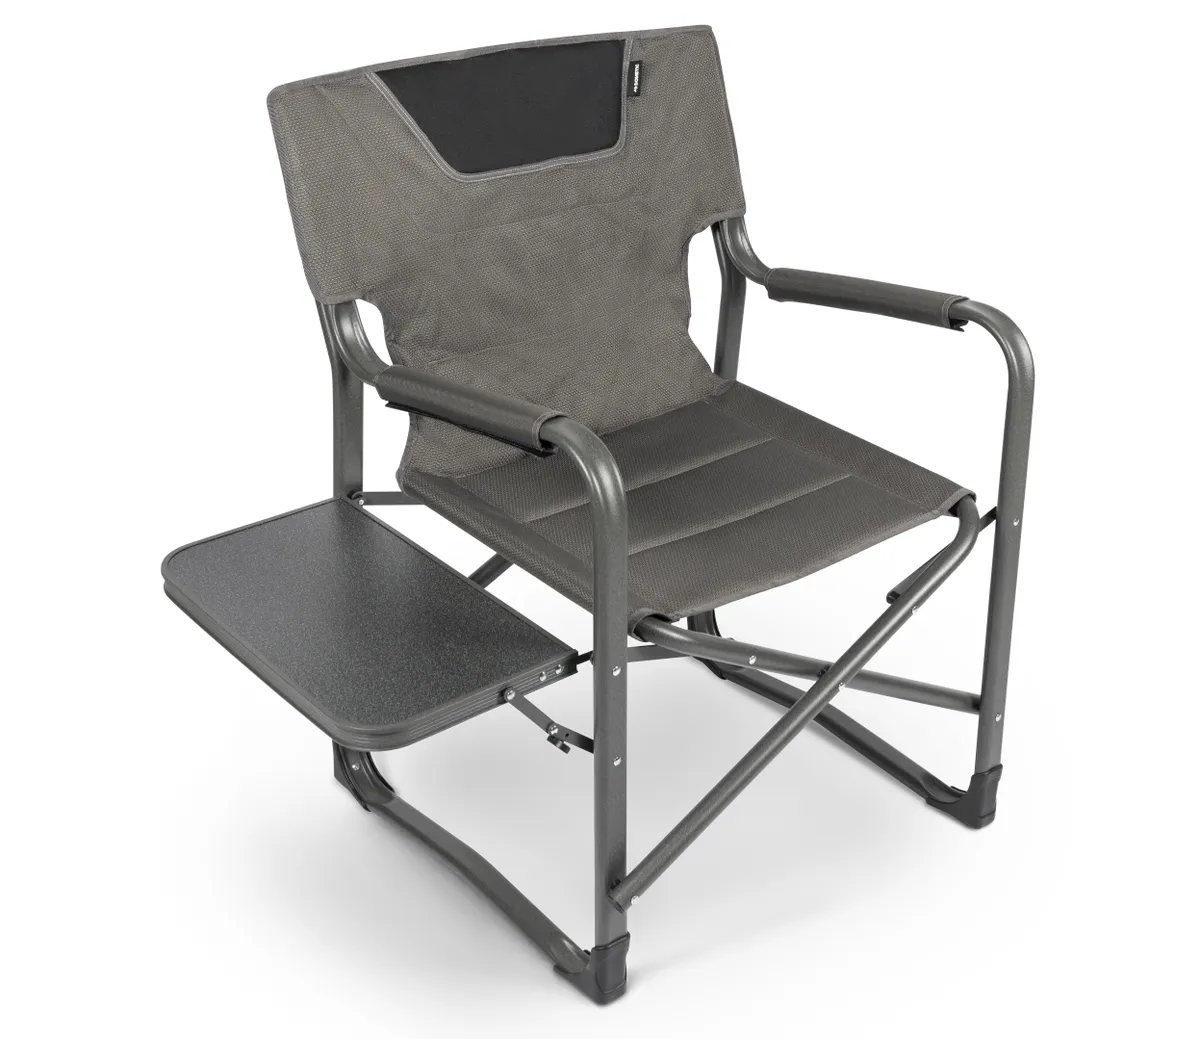 Dometic Forte 180 camping chair